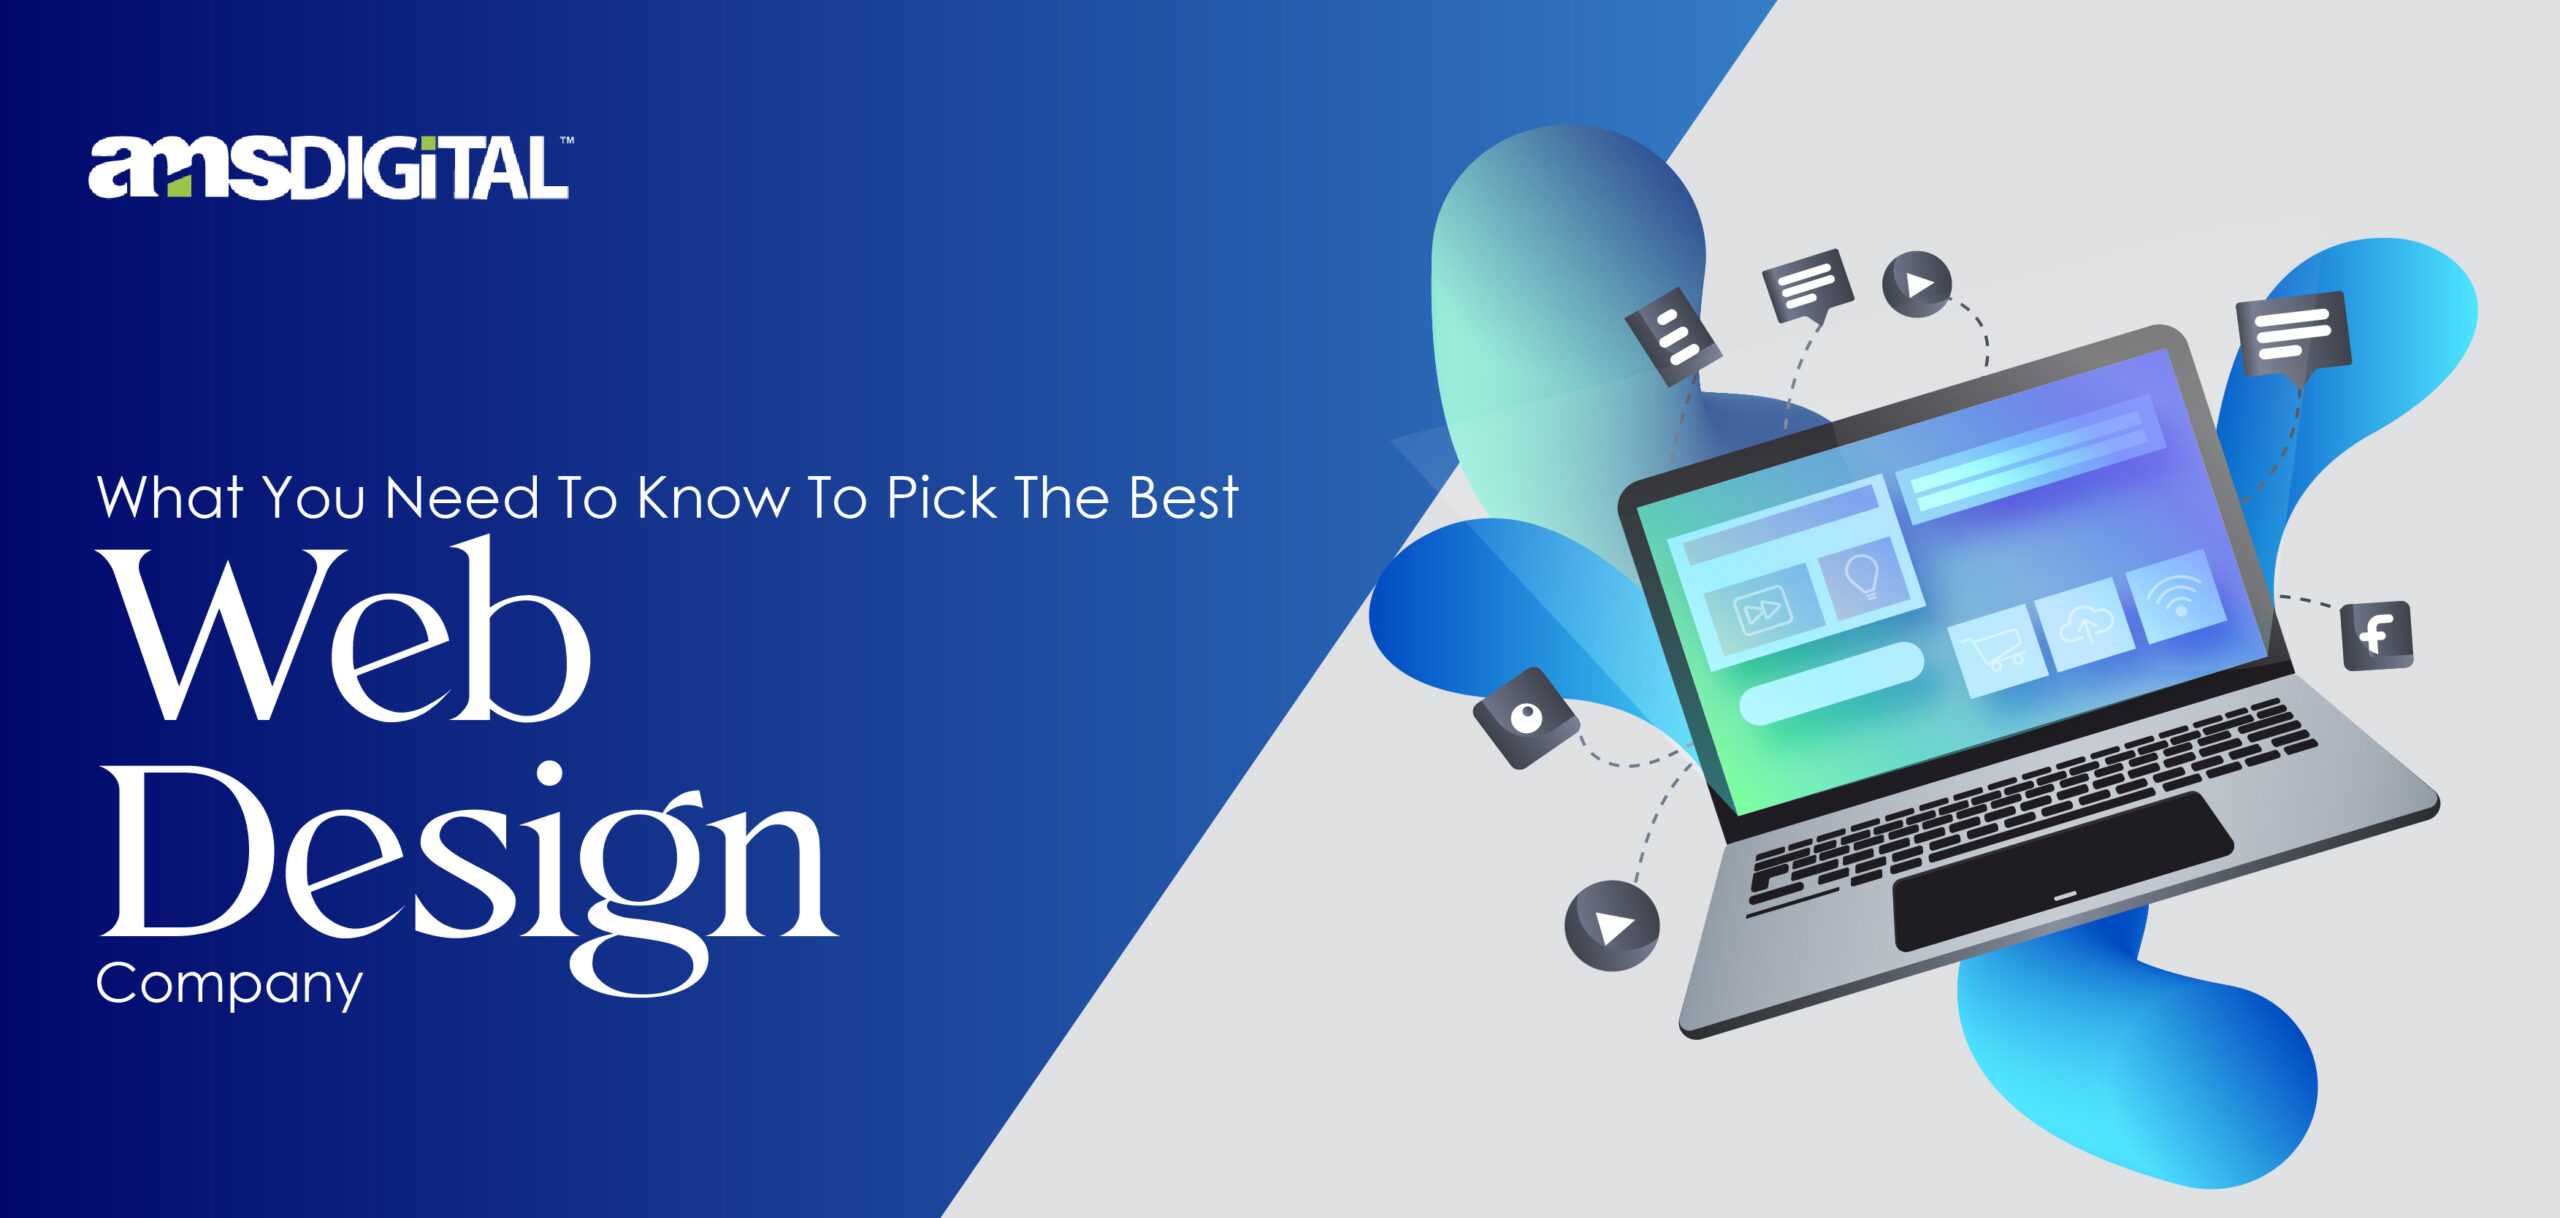 What You Need To Know To Pick The Best Web Design Company